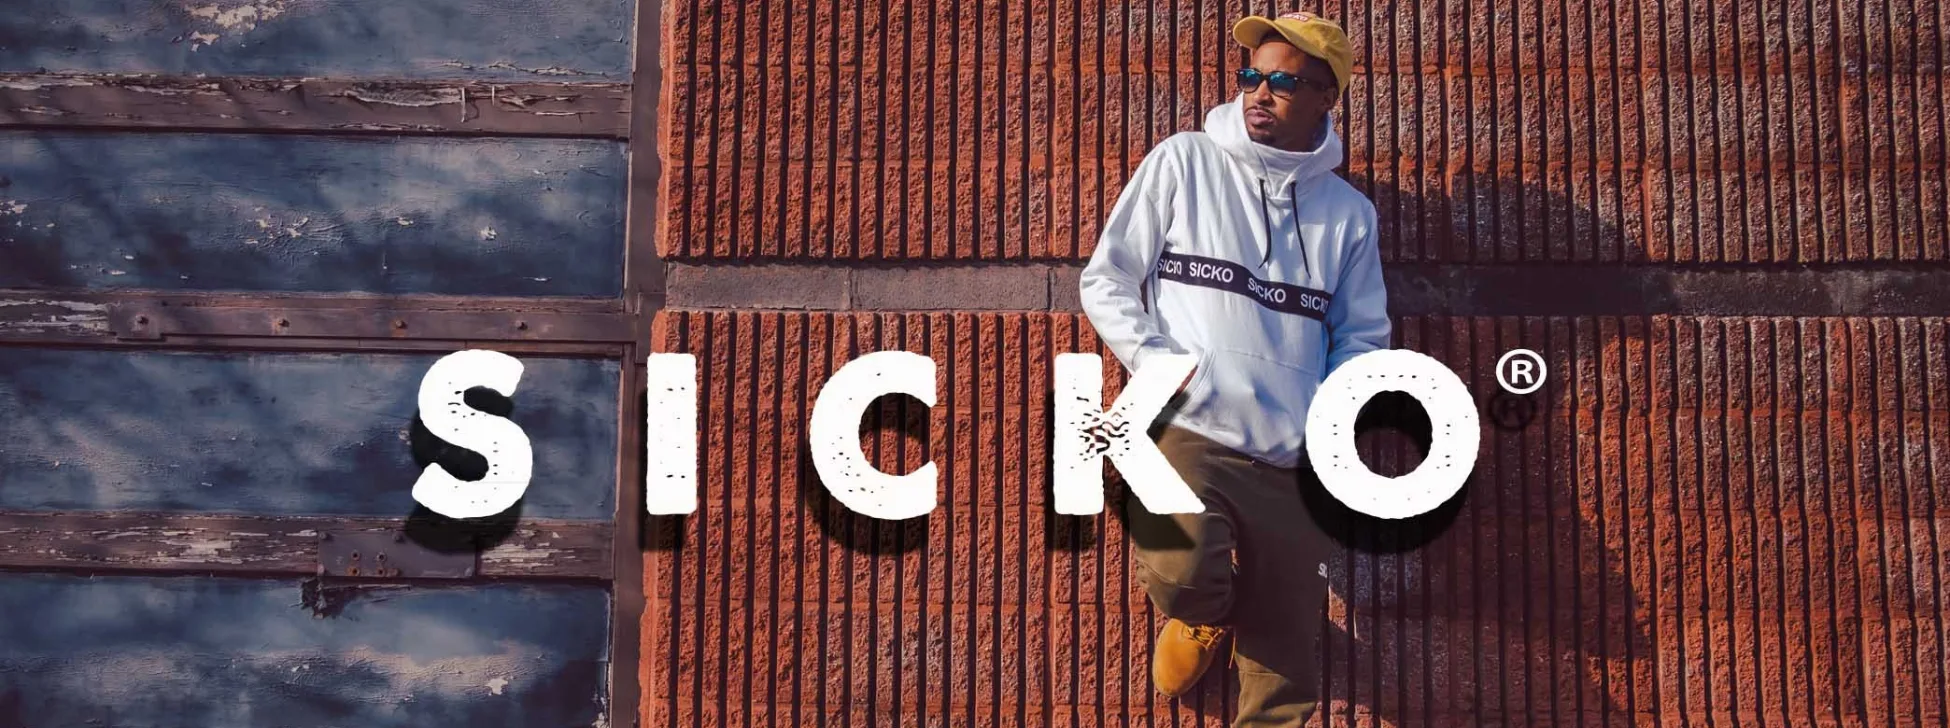 sicko clothing banner